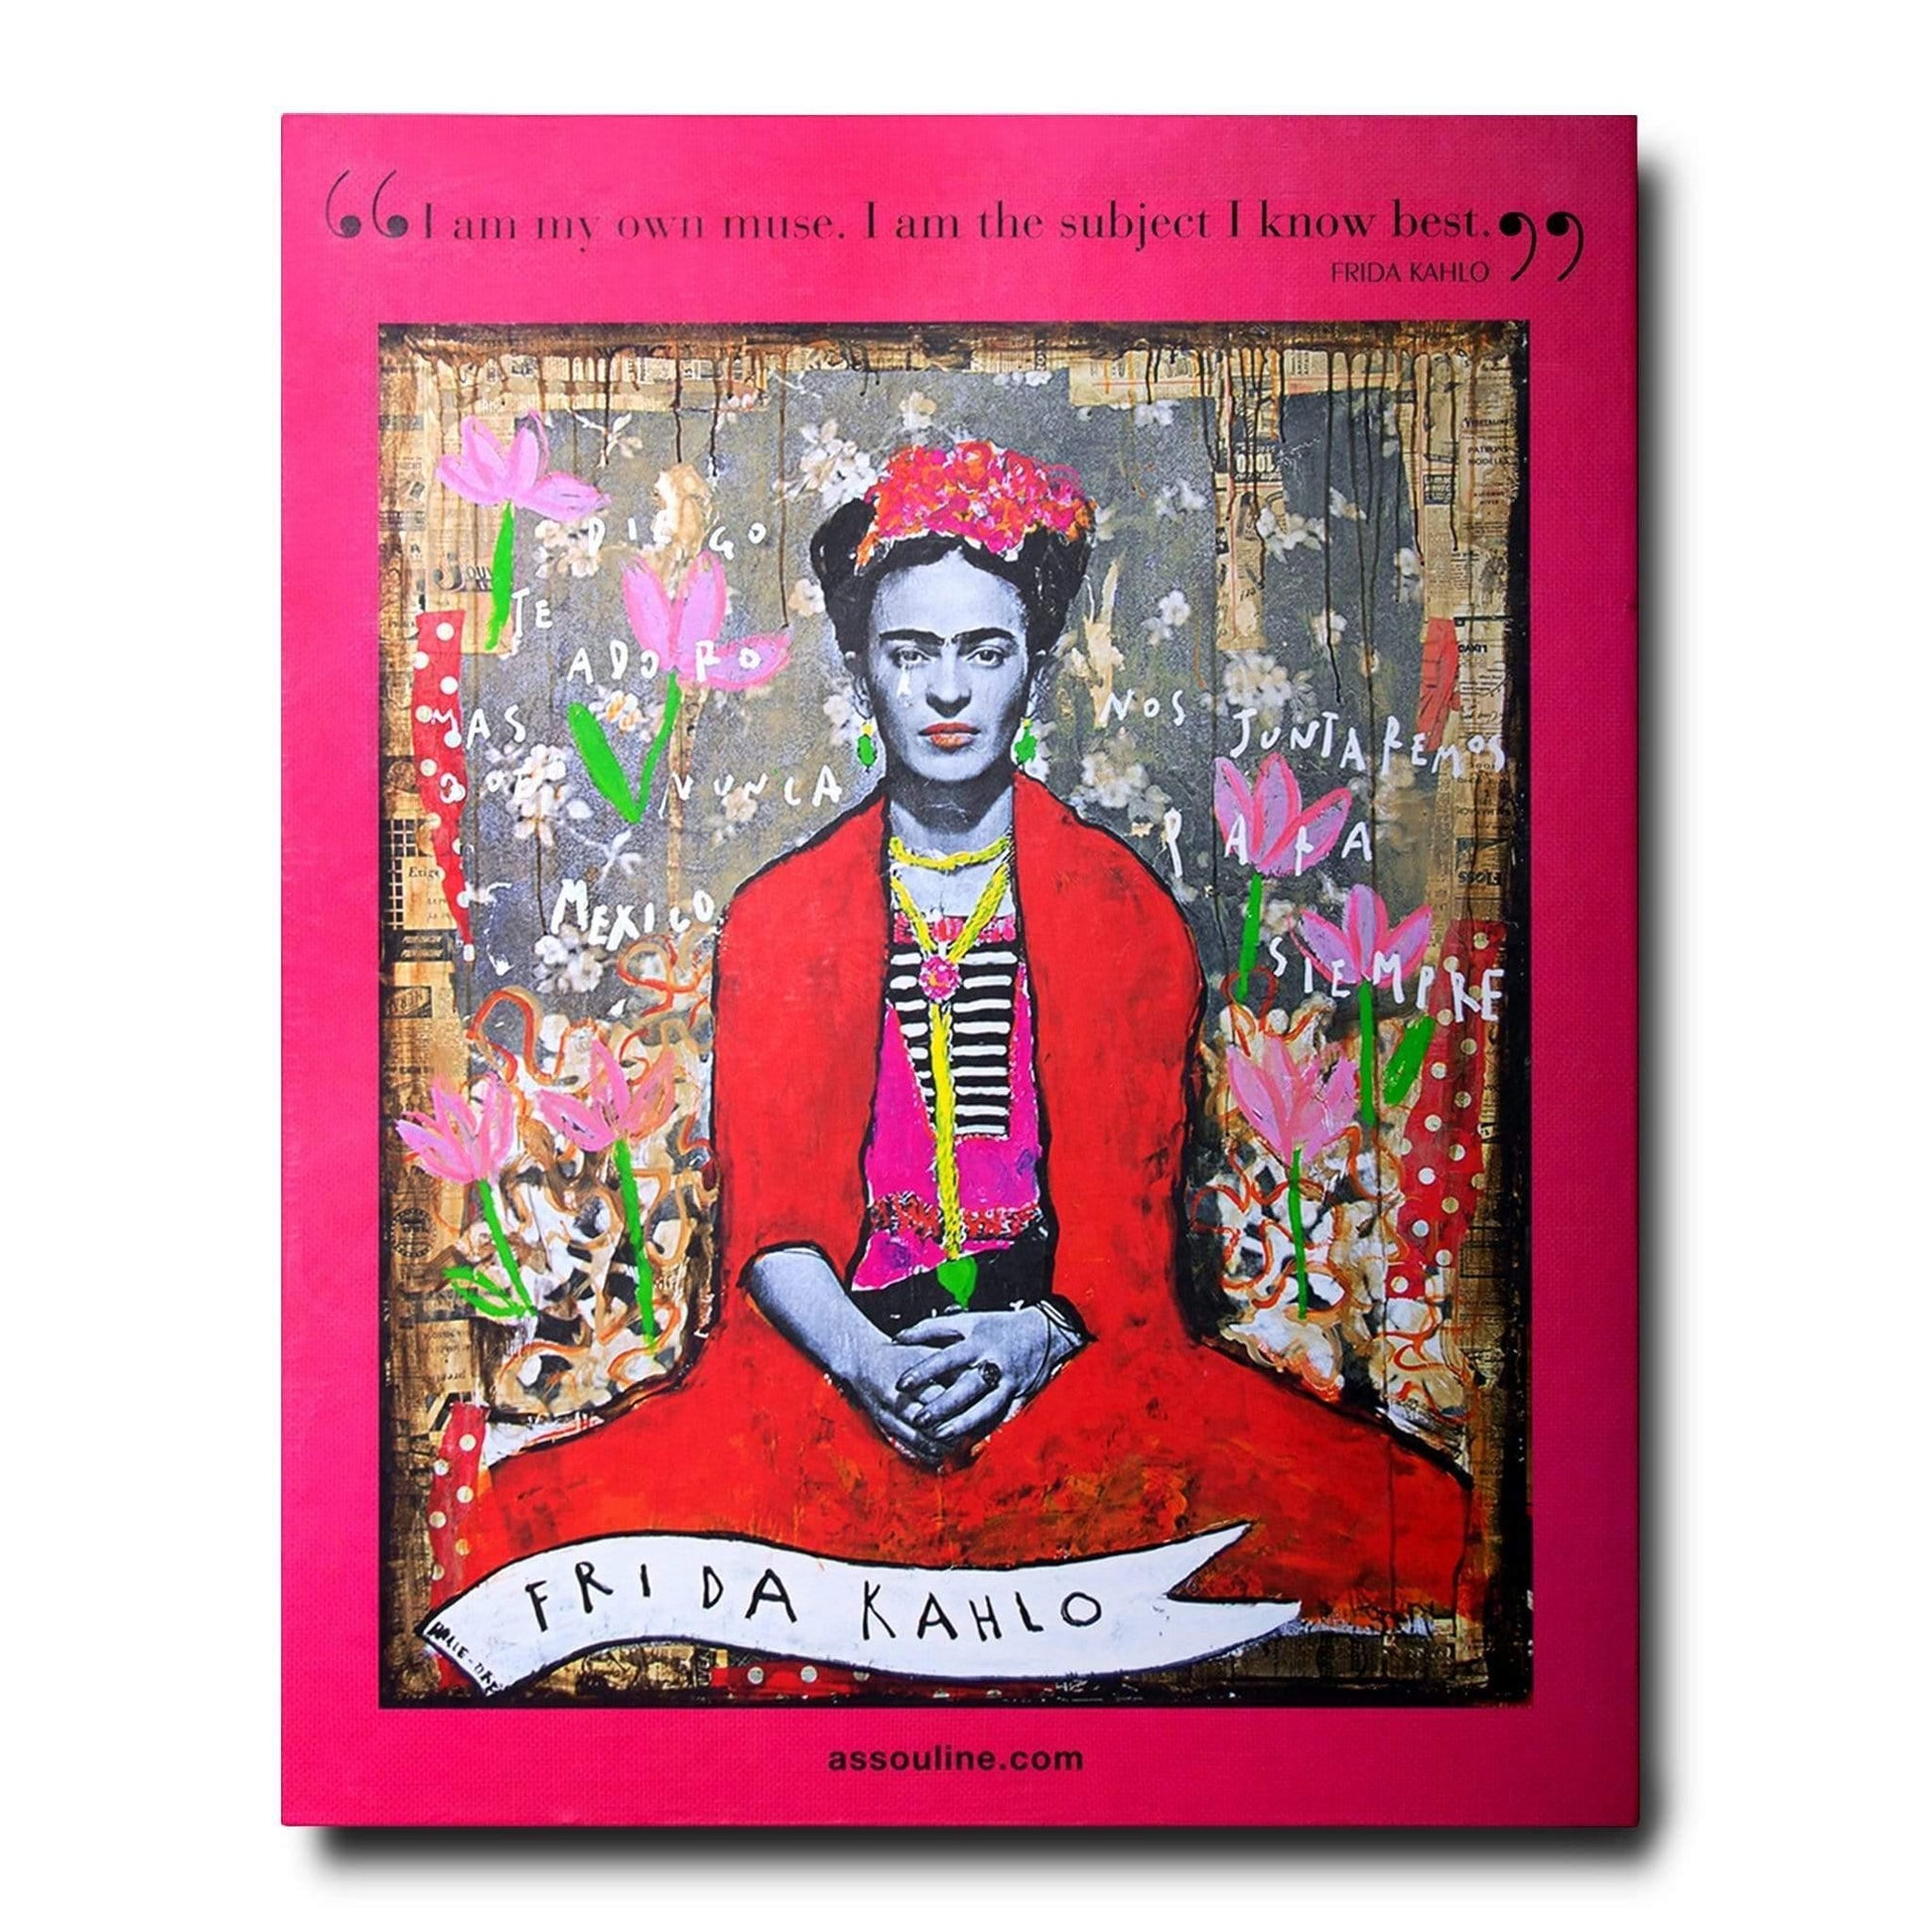 Frida Kahlo: Fashion as the Art of Being - Luxury Books